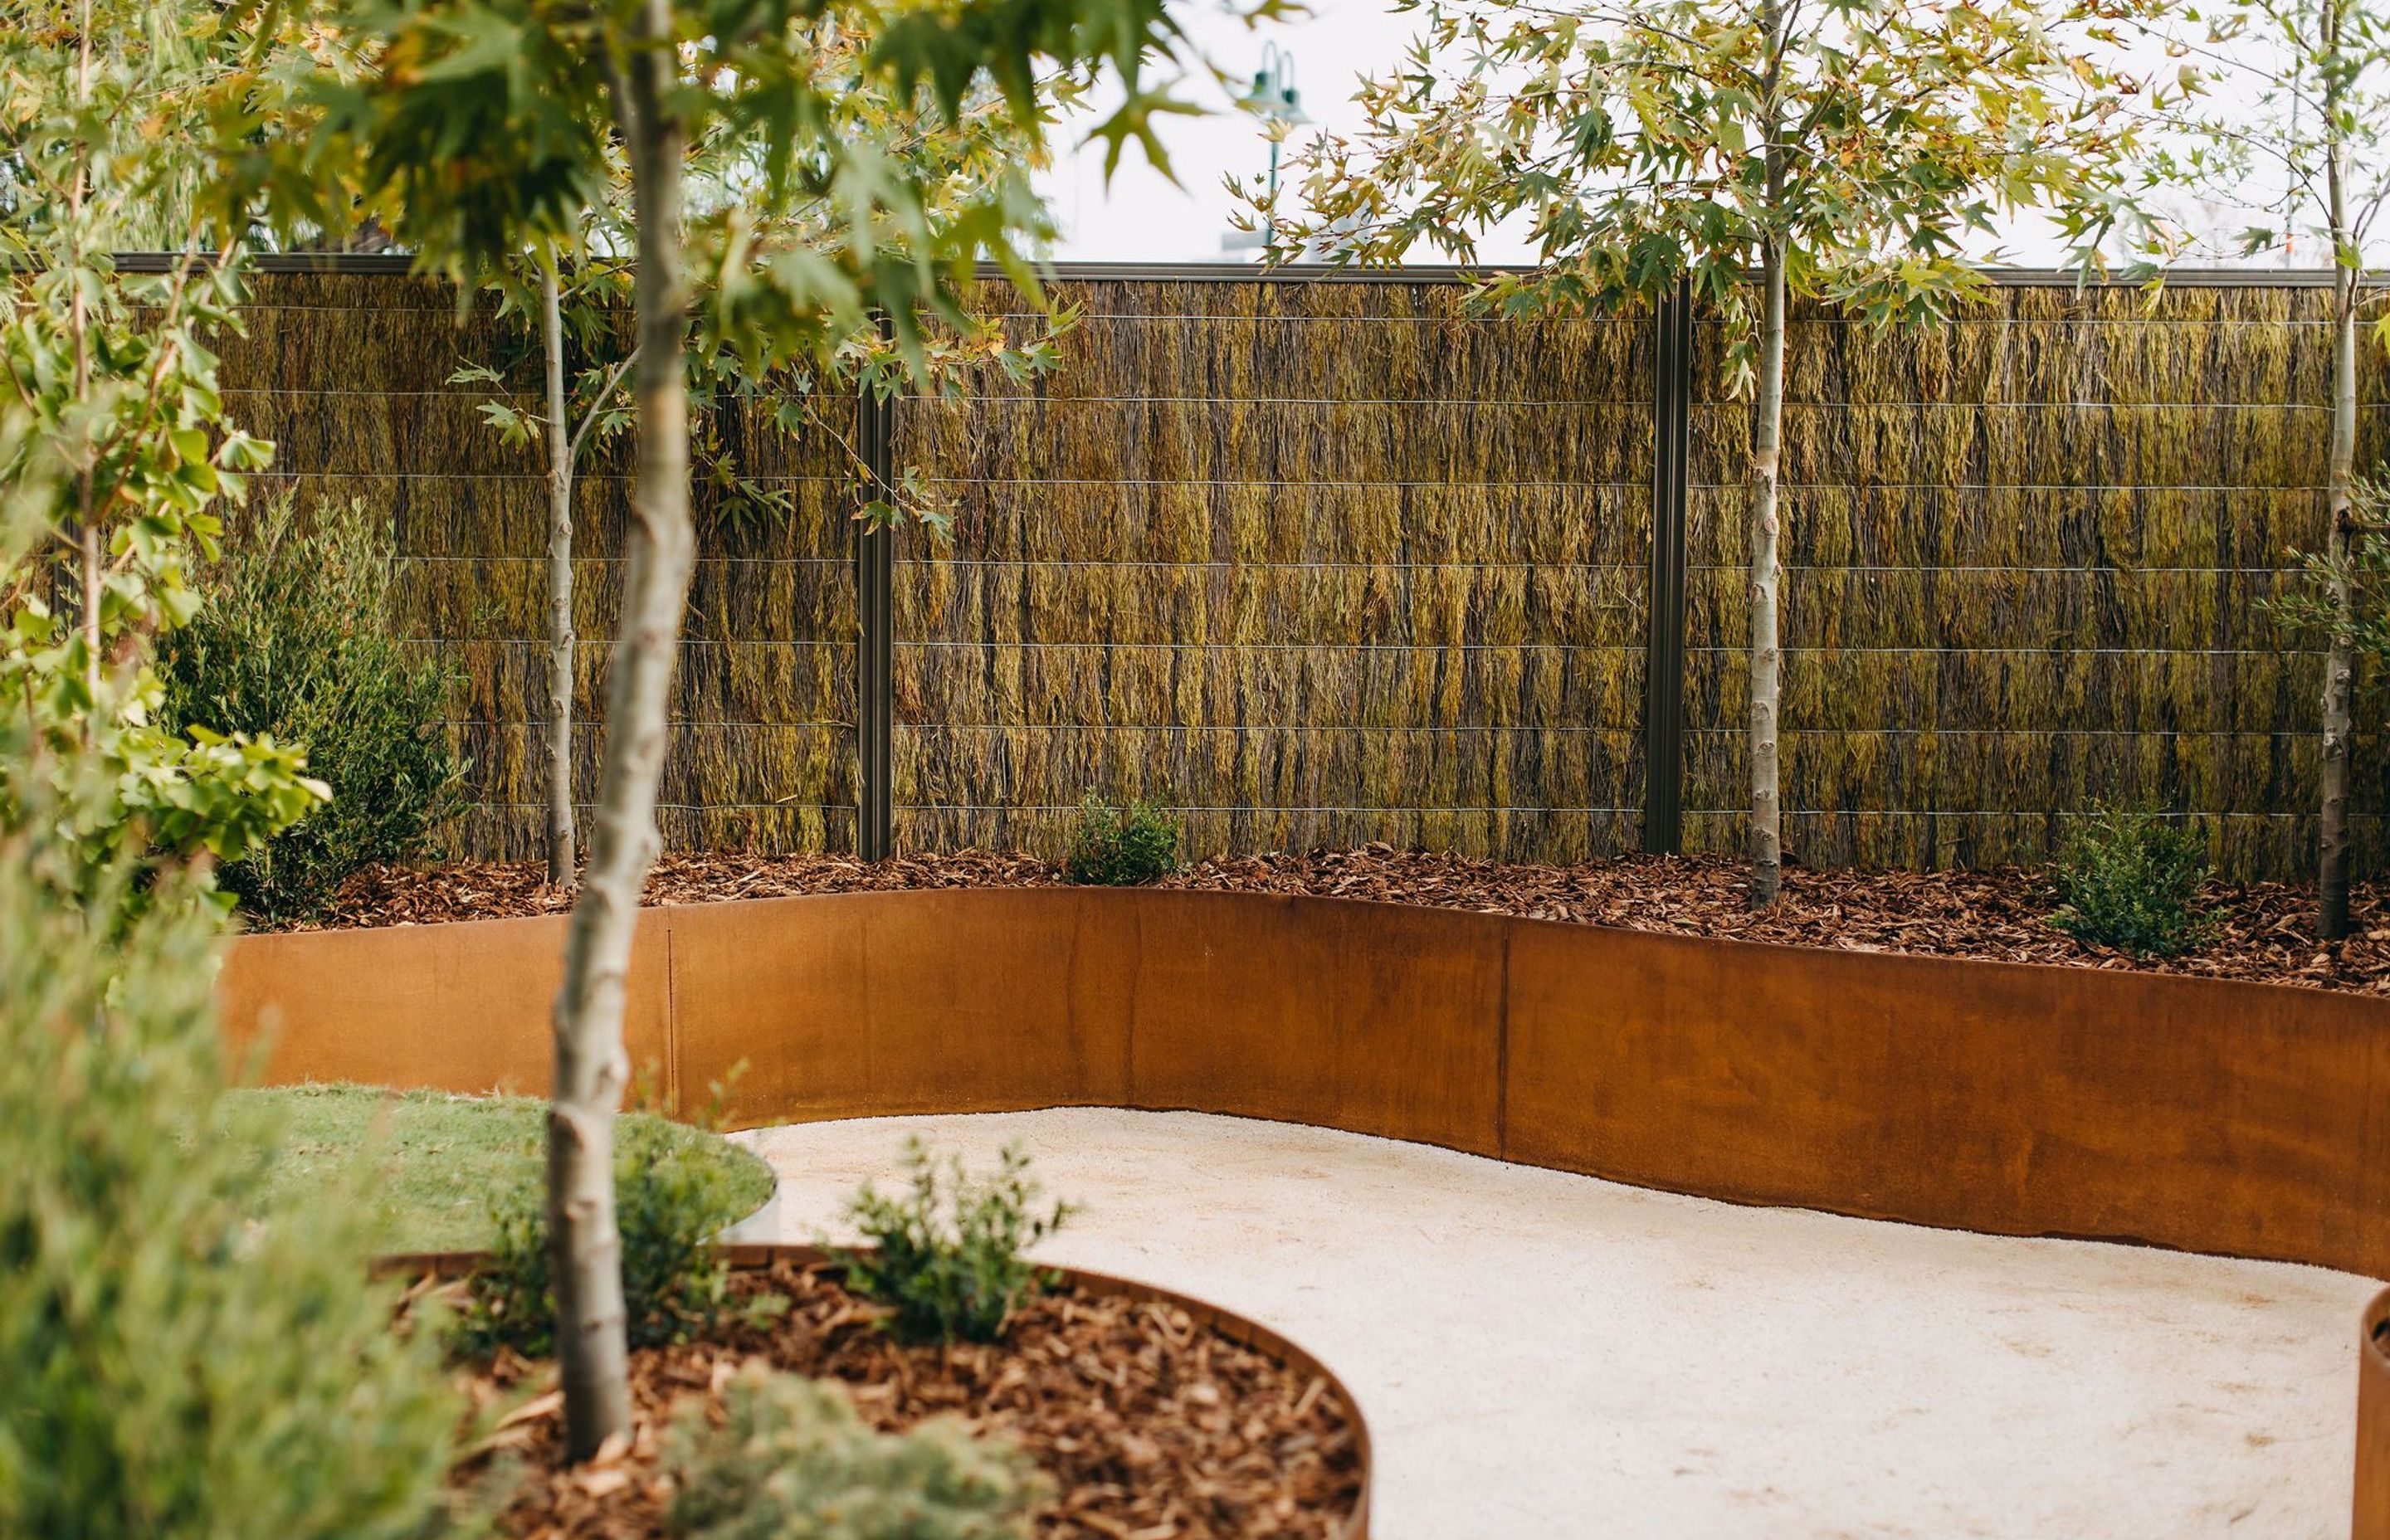 Straightcurve's range of flexible garden edging, retaining walls and modular planters—available in weathering steel and galvanised steel—has made it possible to create self-bracing, free-form curved garden beds.